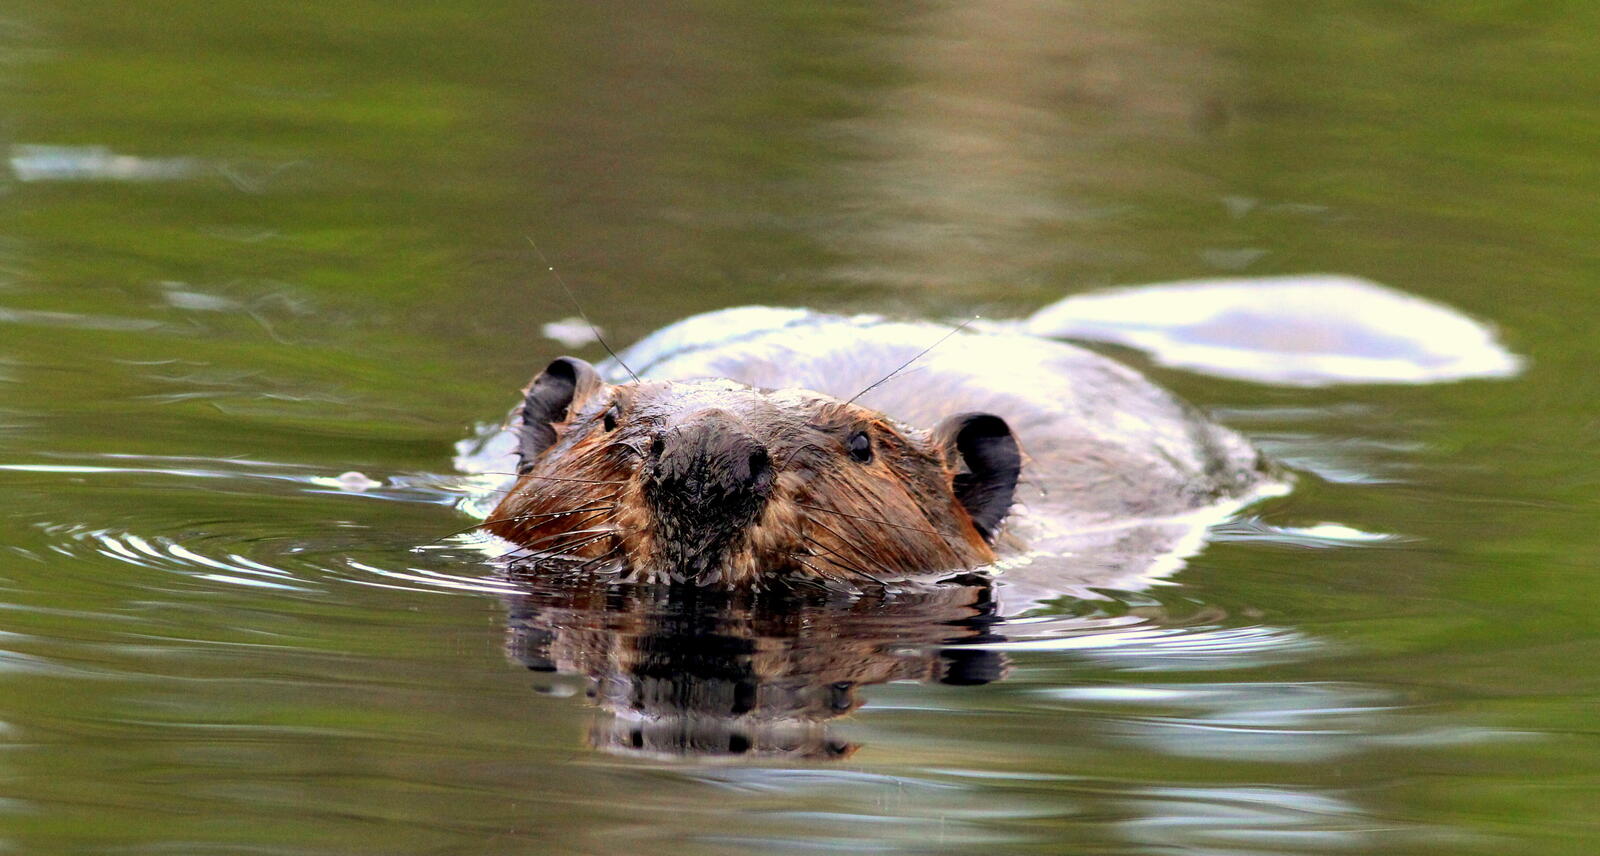 A beaver faces the camera swimming with its head out of water